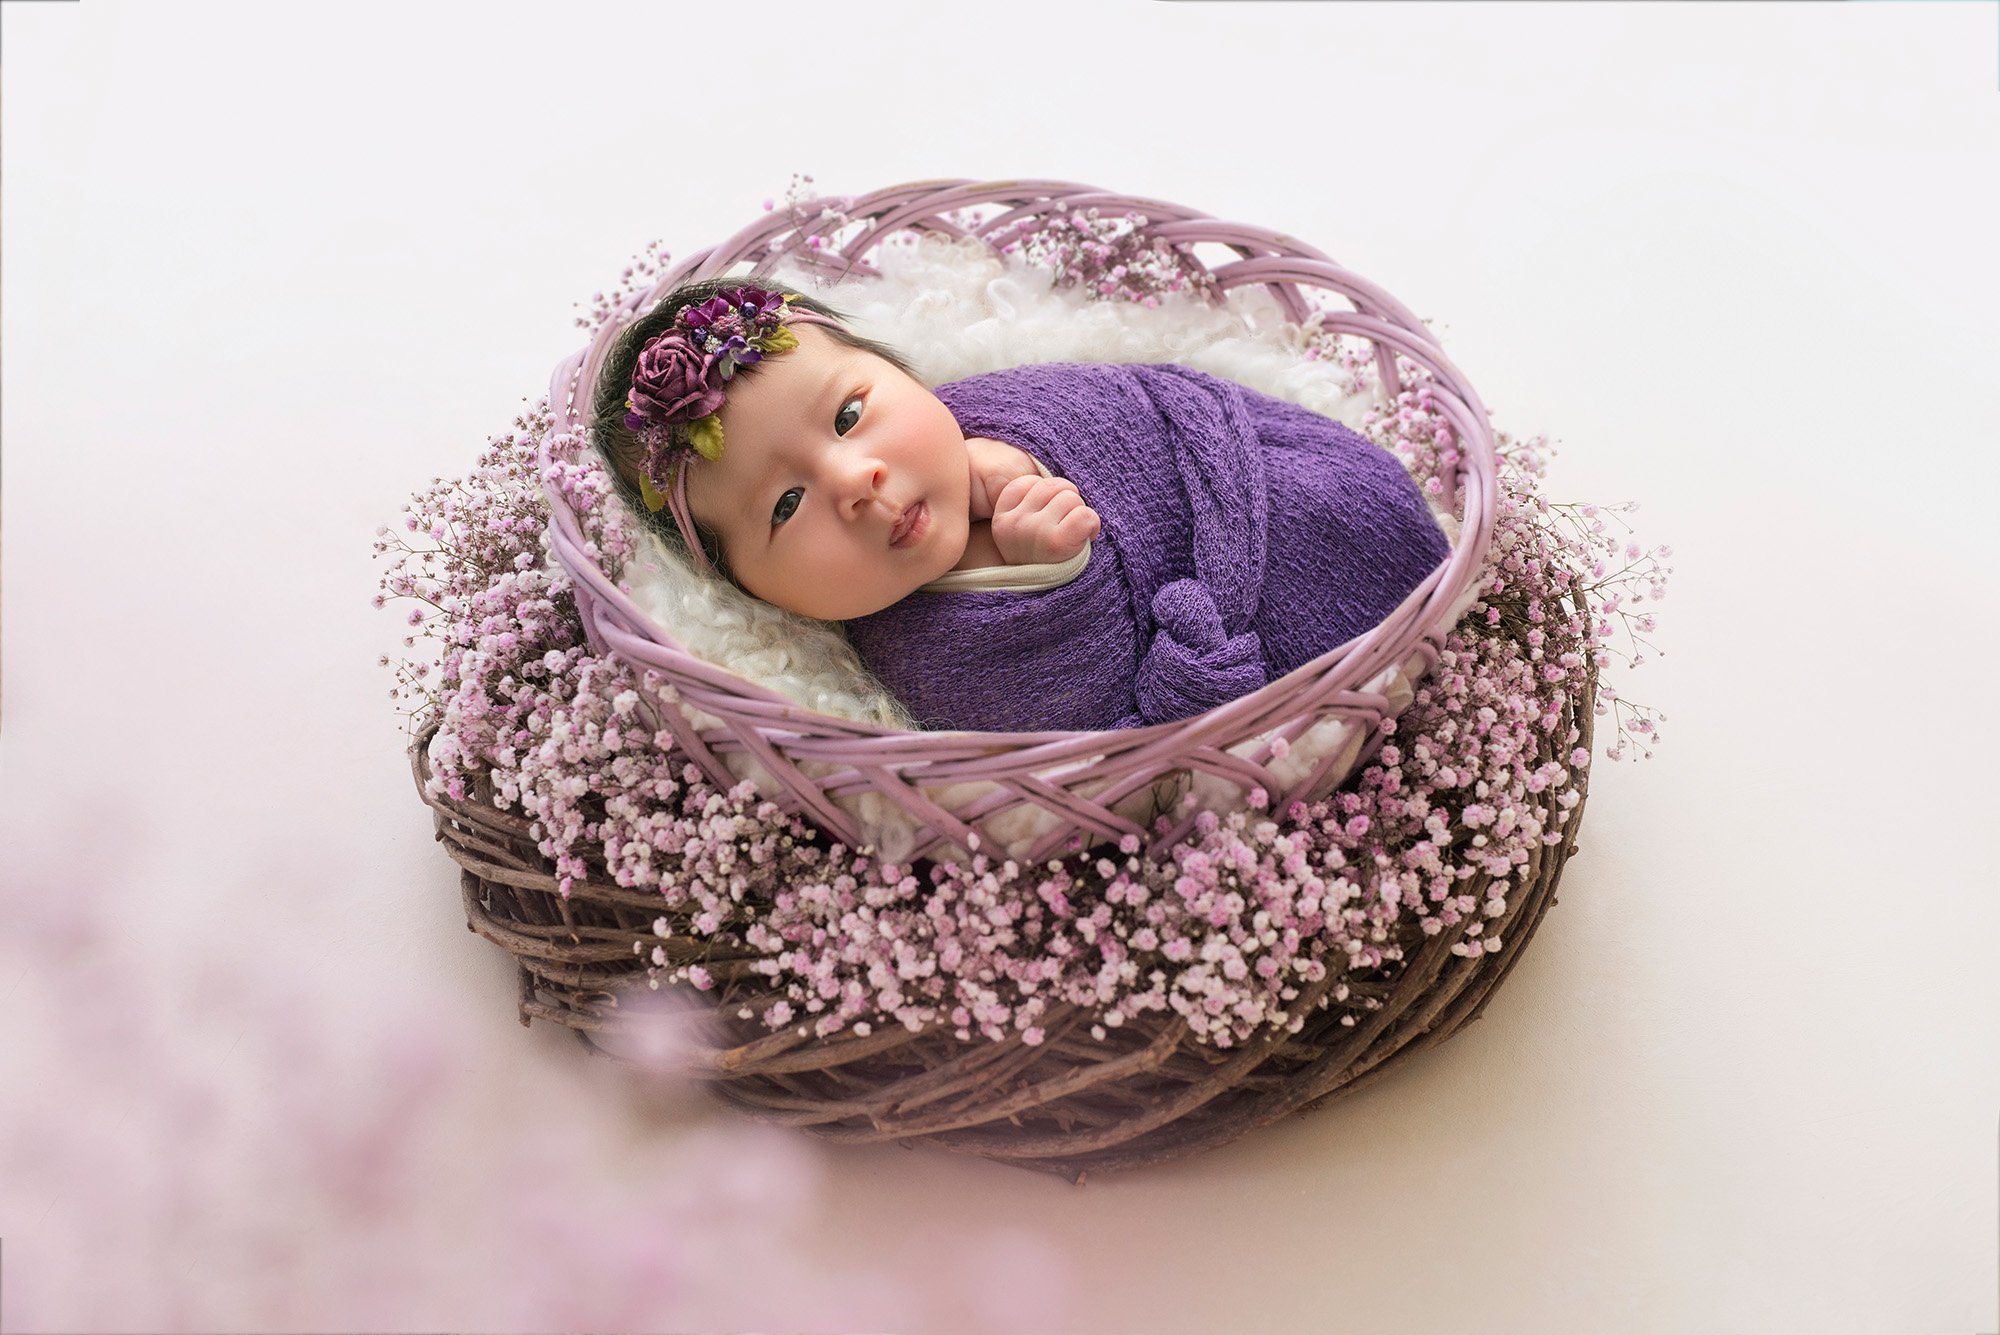 best time to do newborn photos month old baby girl swaddled in purple wrap in a lavender nest looking at the camera with eyes open best time to take newborn photos